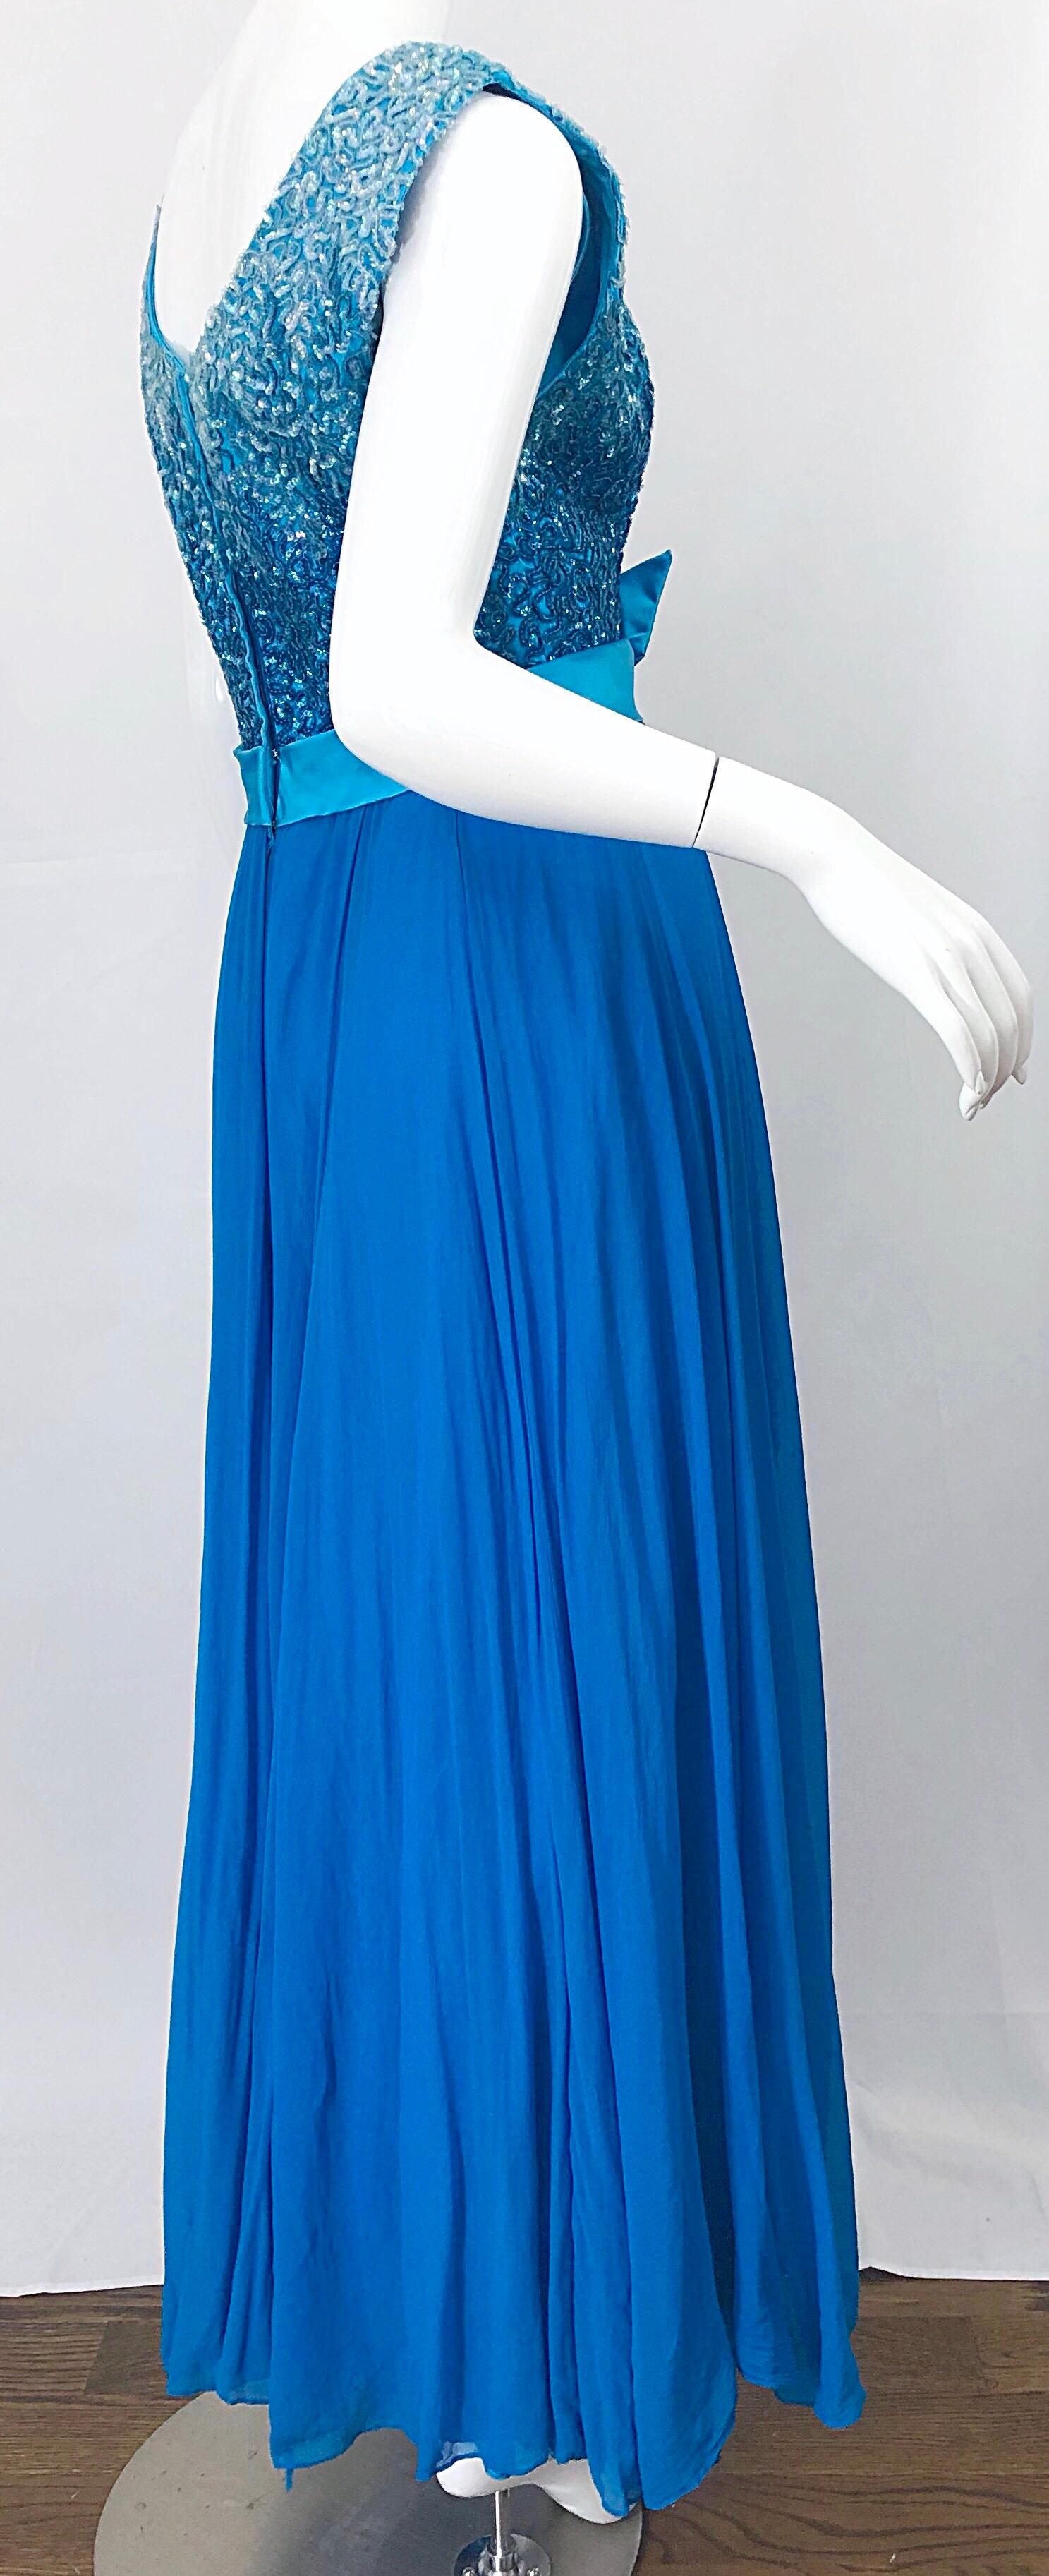 1960s Emma Domb Turquoise Blue Ombre Sequined Silk Chiffon Vintage 60s Gown For Sale 2